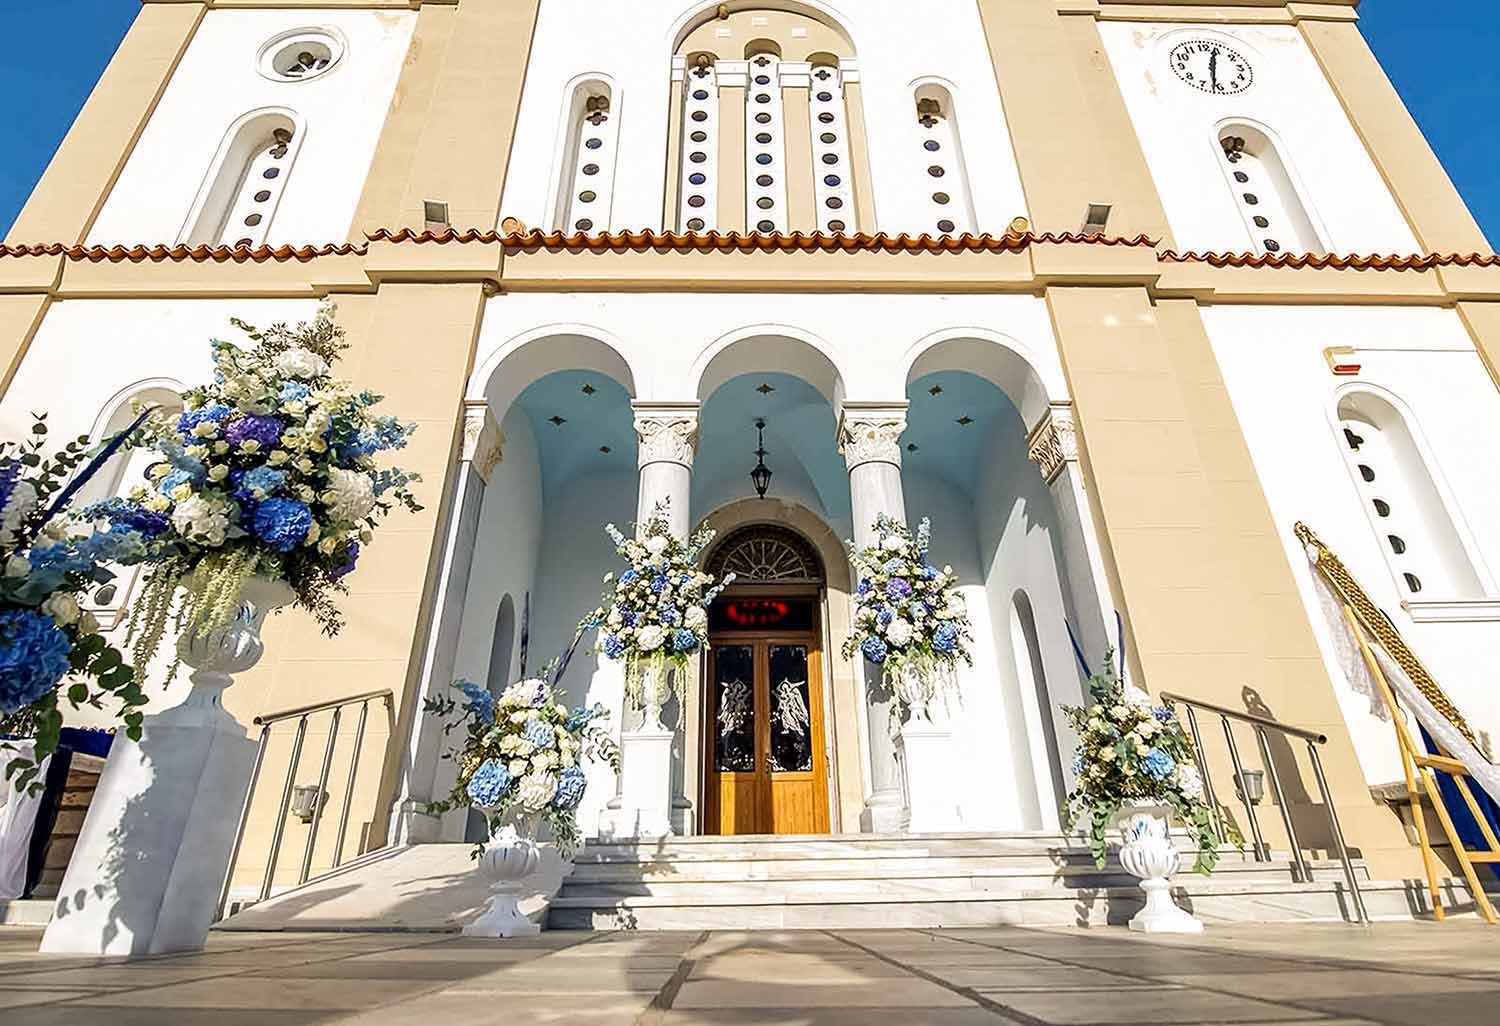 A magestic entrance for the church with white urns decorated with impressive flower arangements